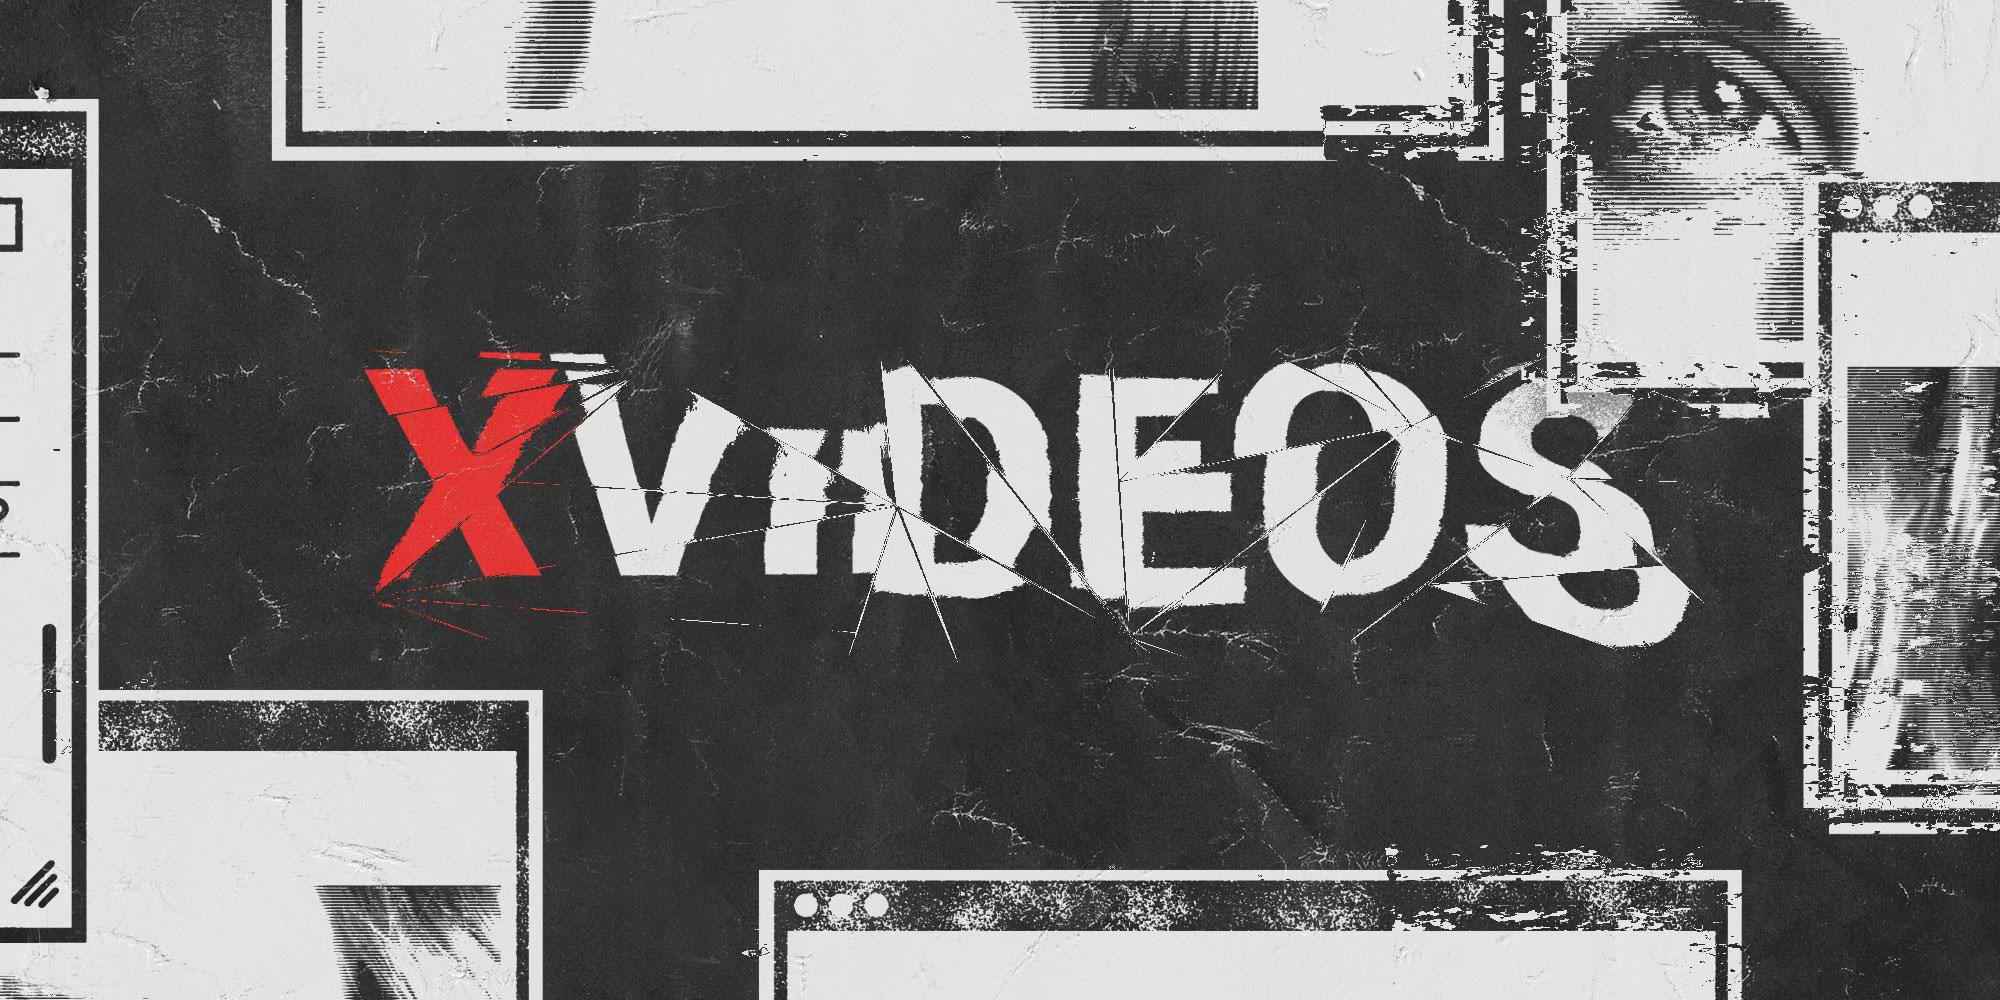 Xvdeohd Downlod - XVideos, World's Most Popular Porn Site, Reportedly Hosts Nonconsensual  Content & Child Exploitation